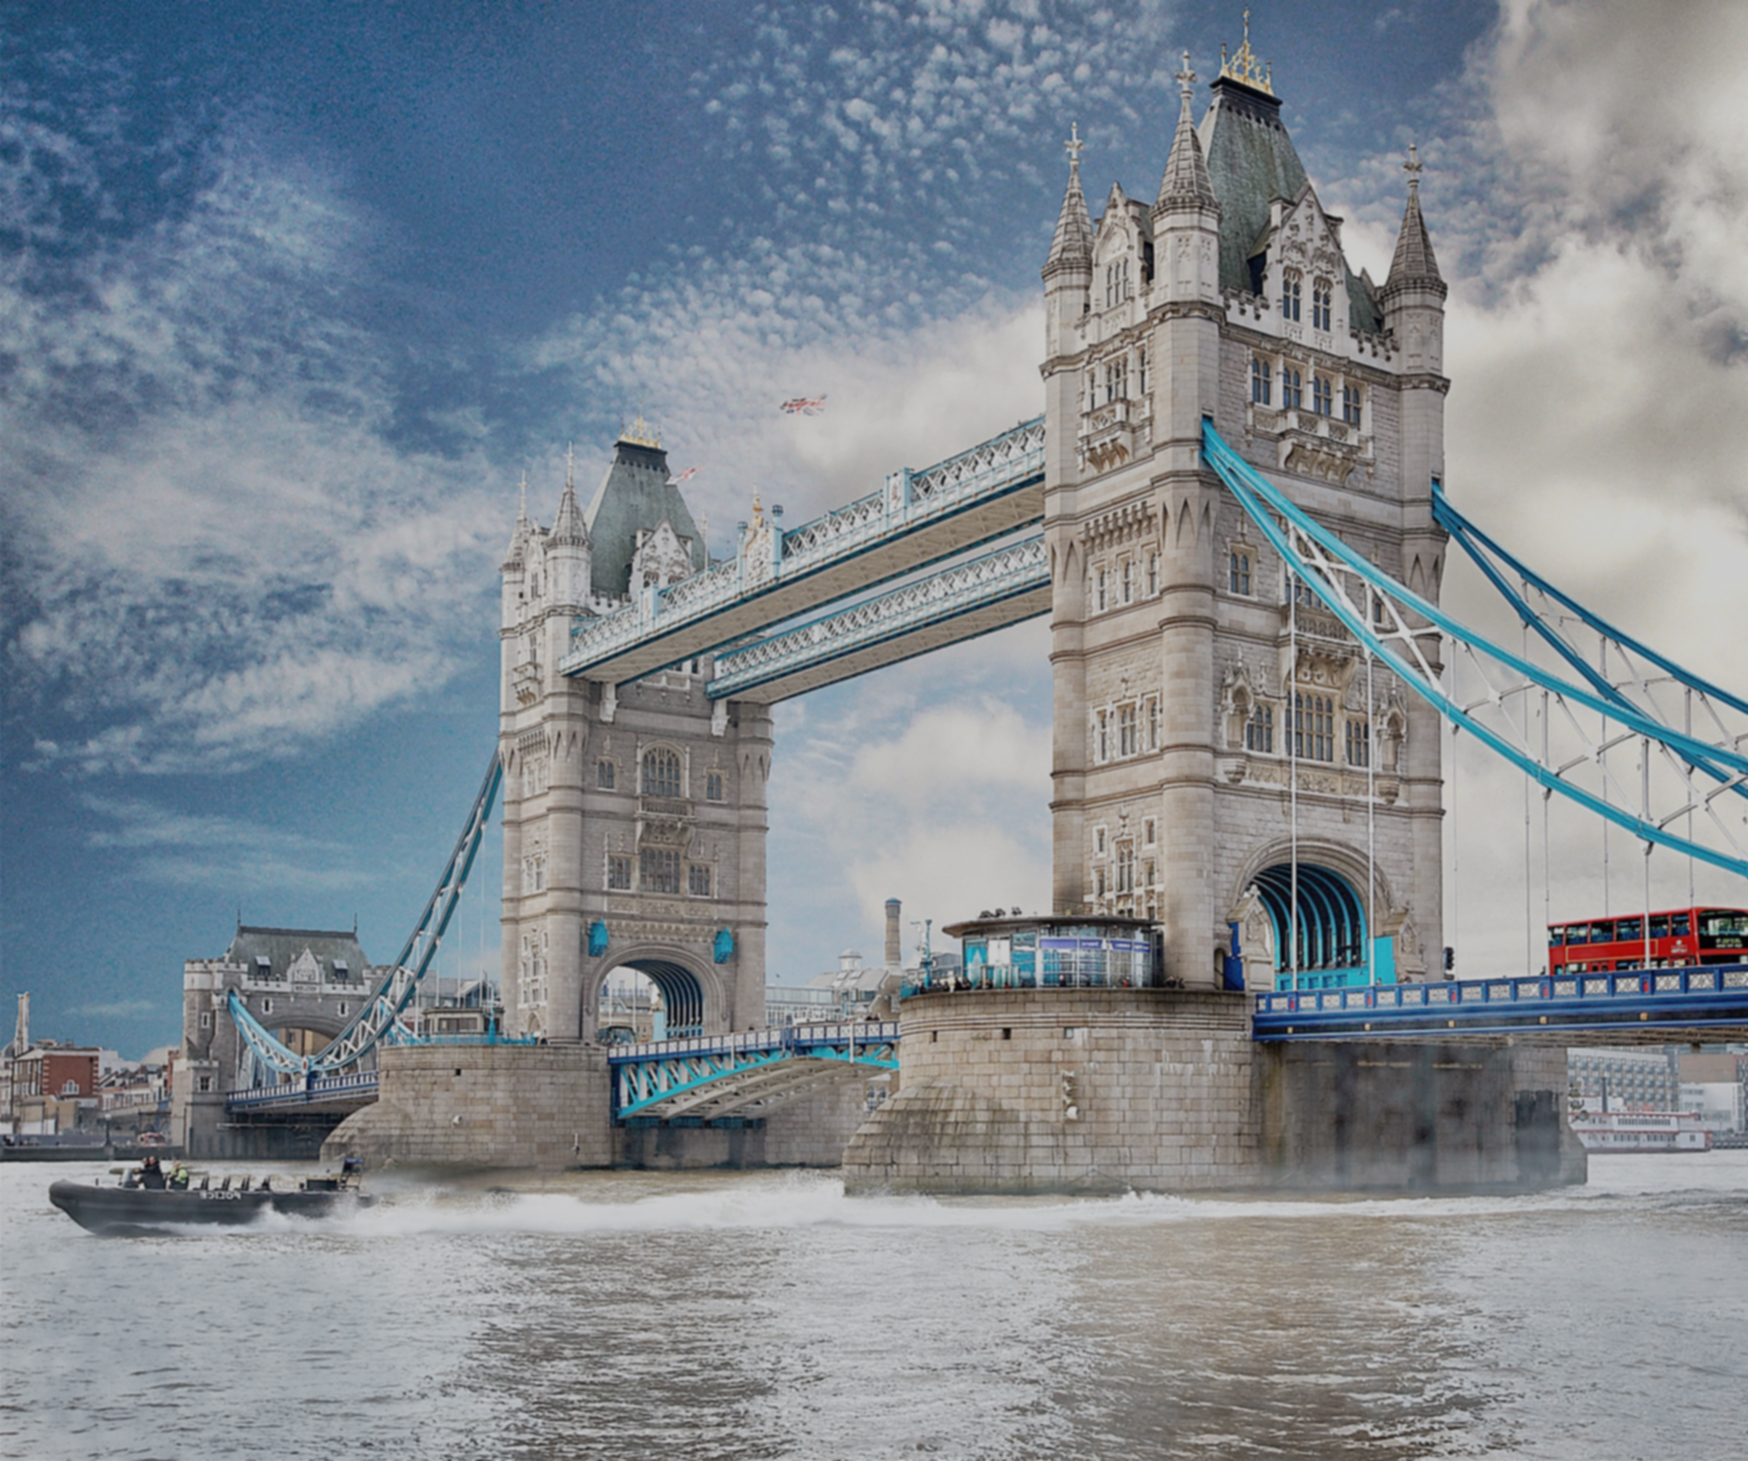 Developing an engaging family trail for London's Tower Bridge